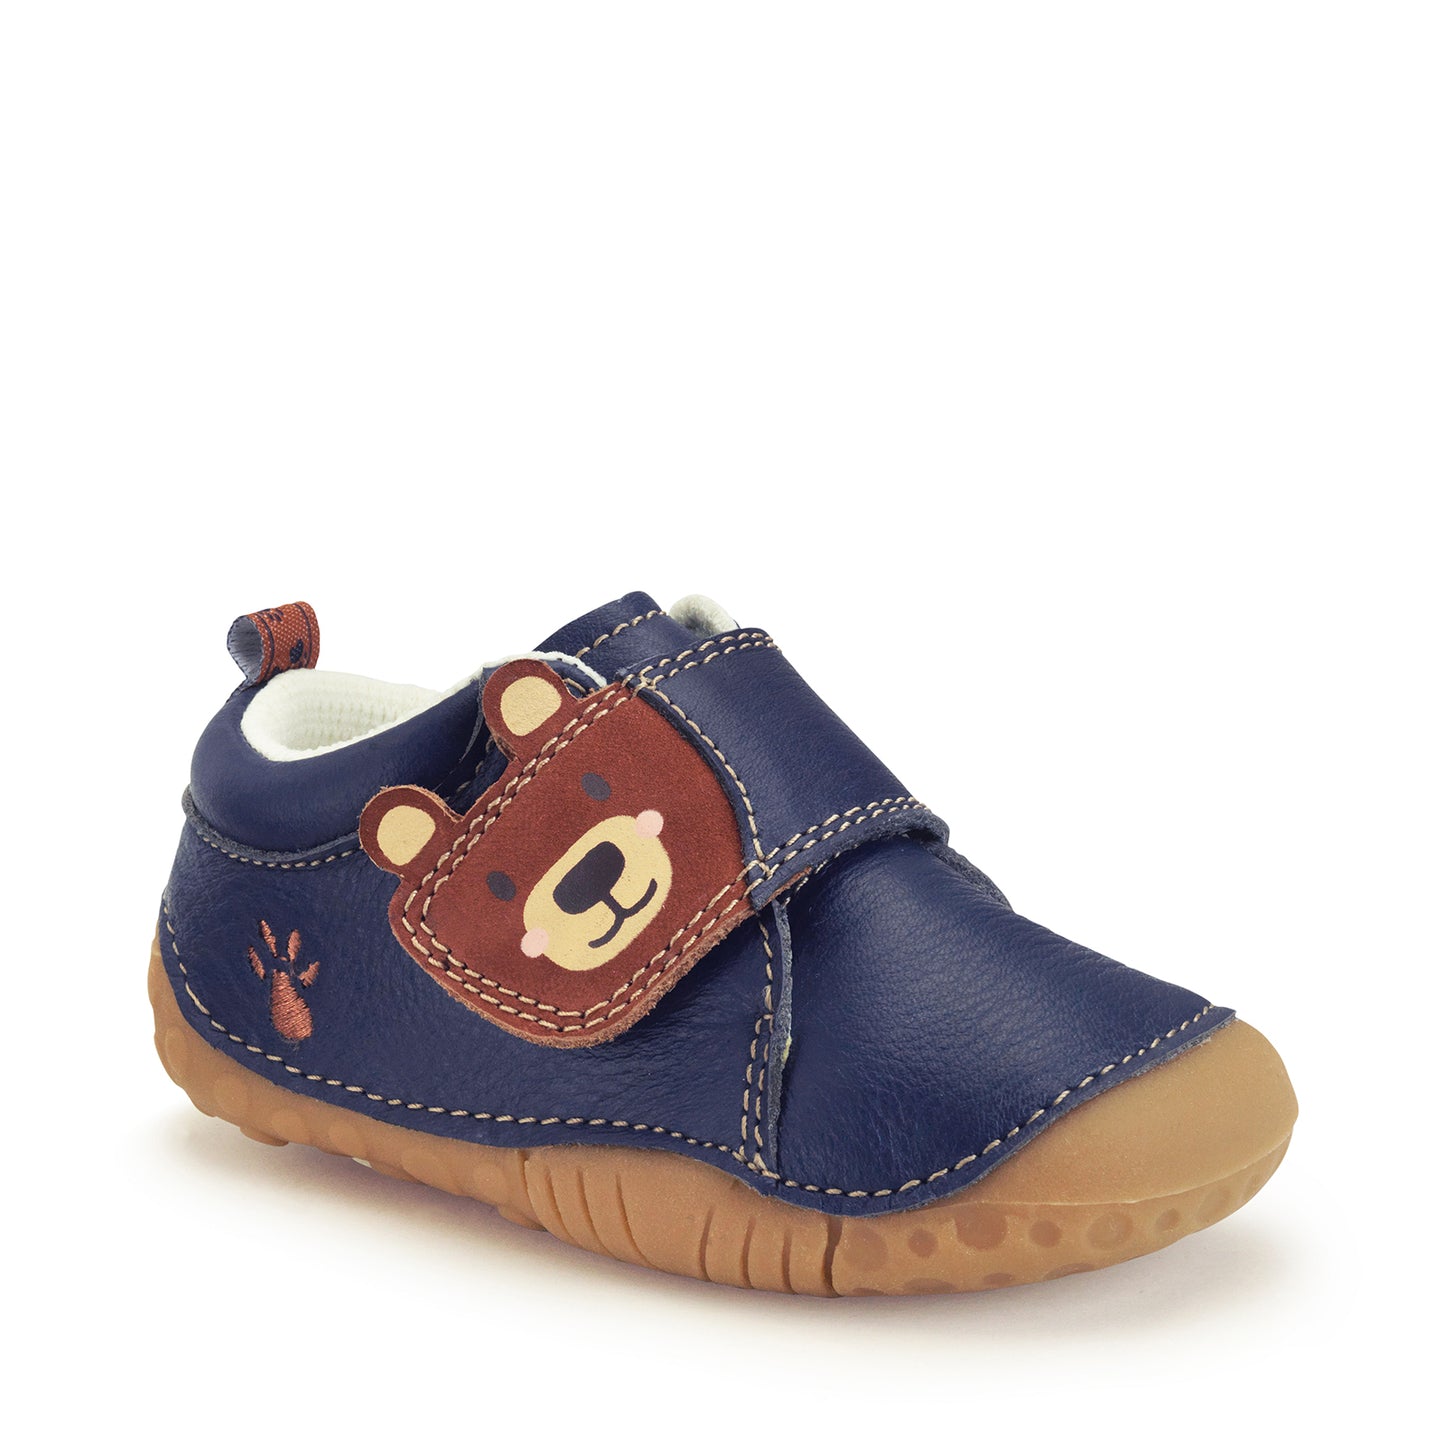 A boy's pre-walker by Start Rite, style Bear Hug,in navy leather with brown paw print detail to side and brown bears face on velcro fastening. Toe bumper. Angled right side view.